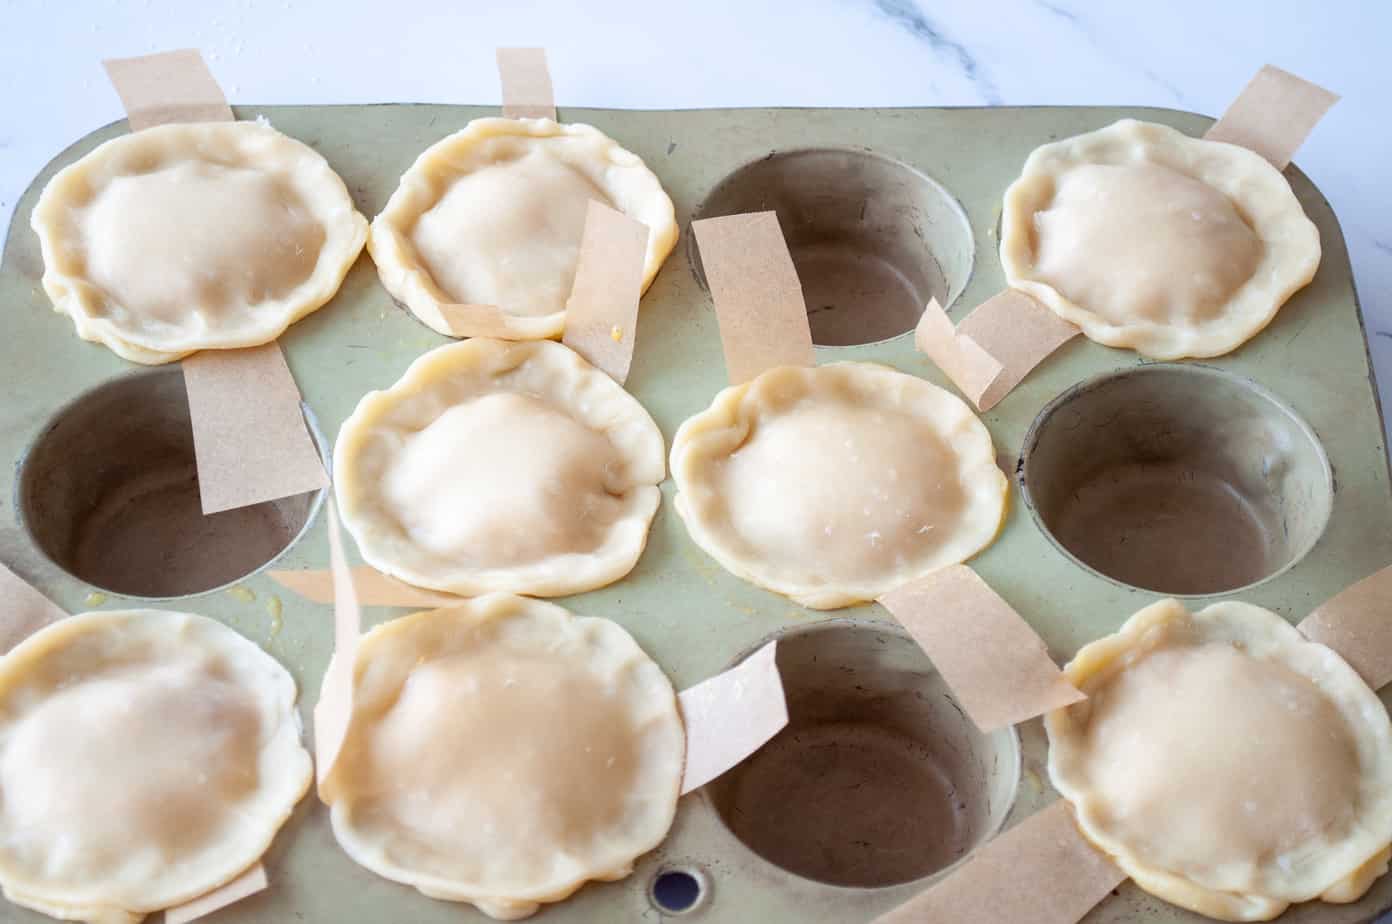 Tiny pies ready for their egg wash.